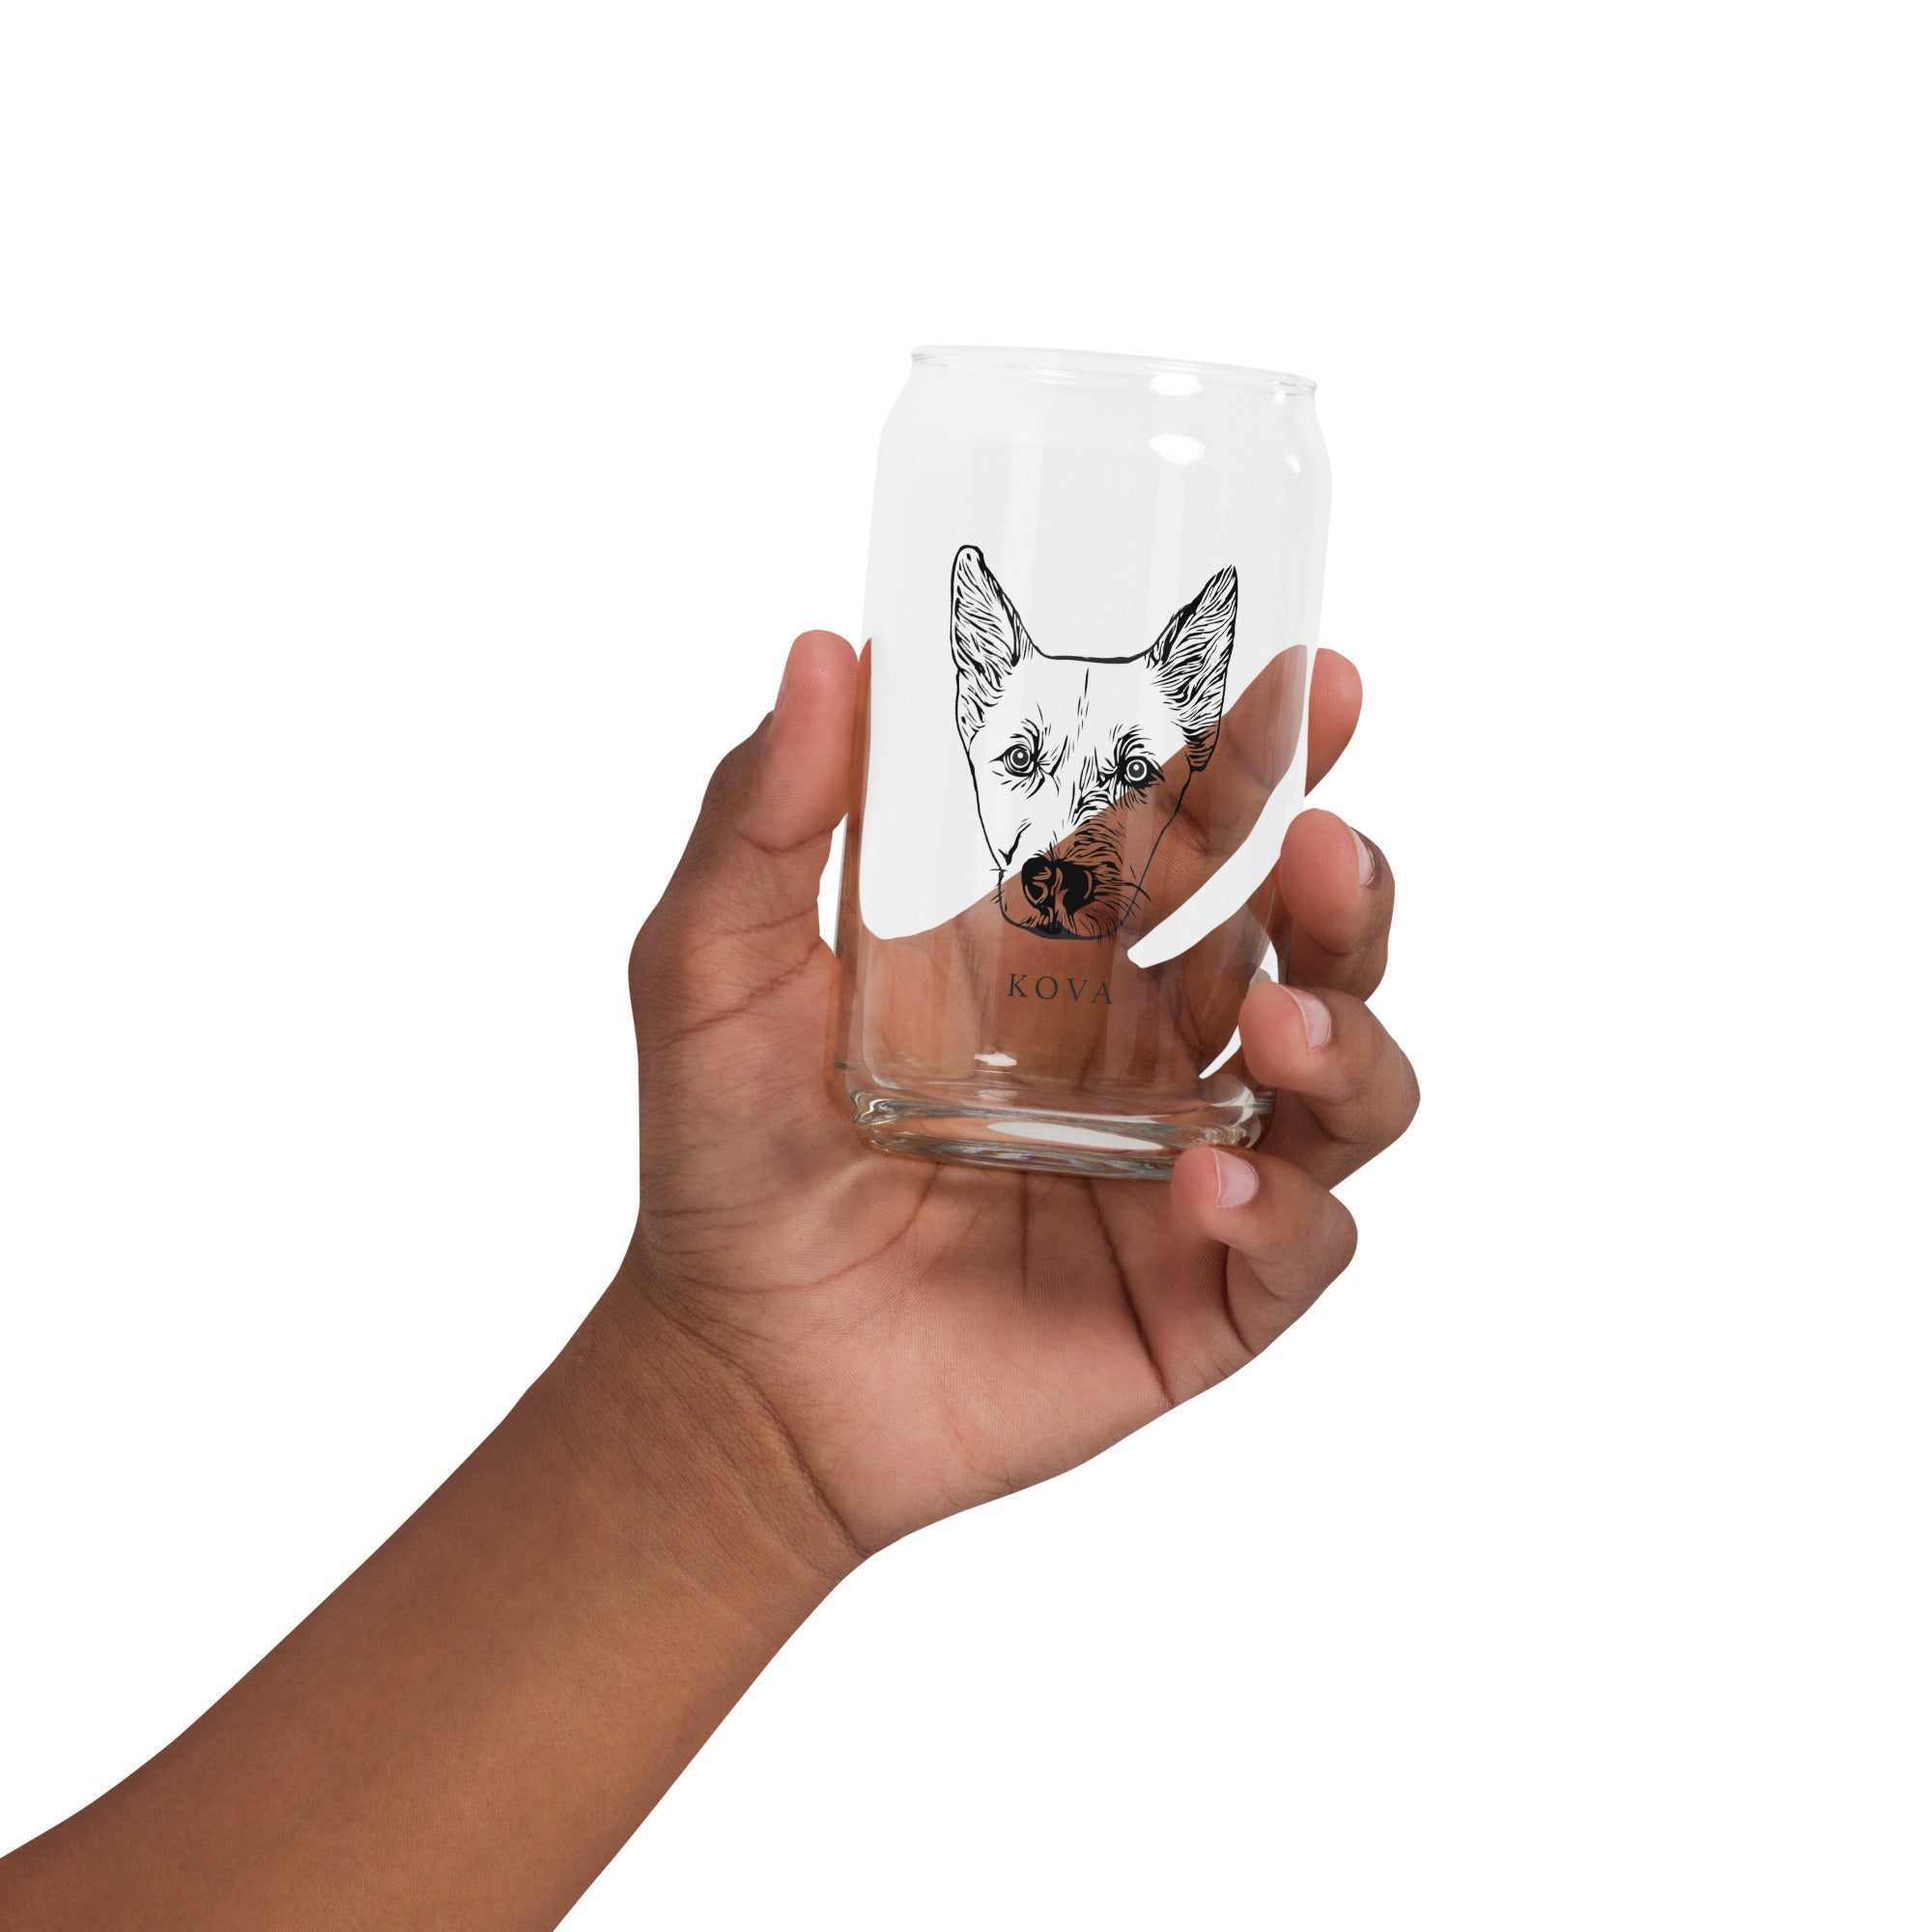 http://www.waggedtails.com/cdn/shop/files/Wagged_Tails_Clear_Tumbler_16oz_Held.jpg?v=1703179373